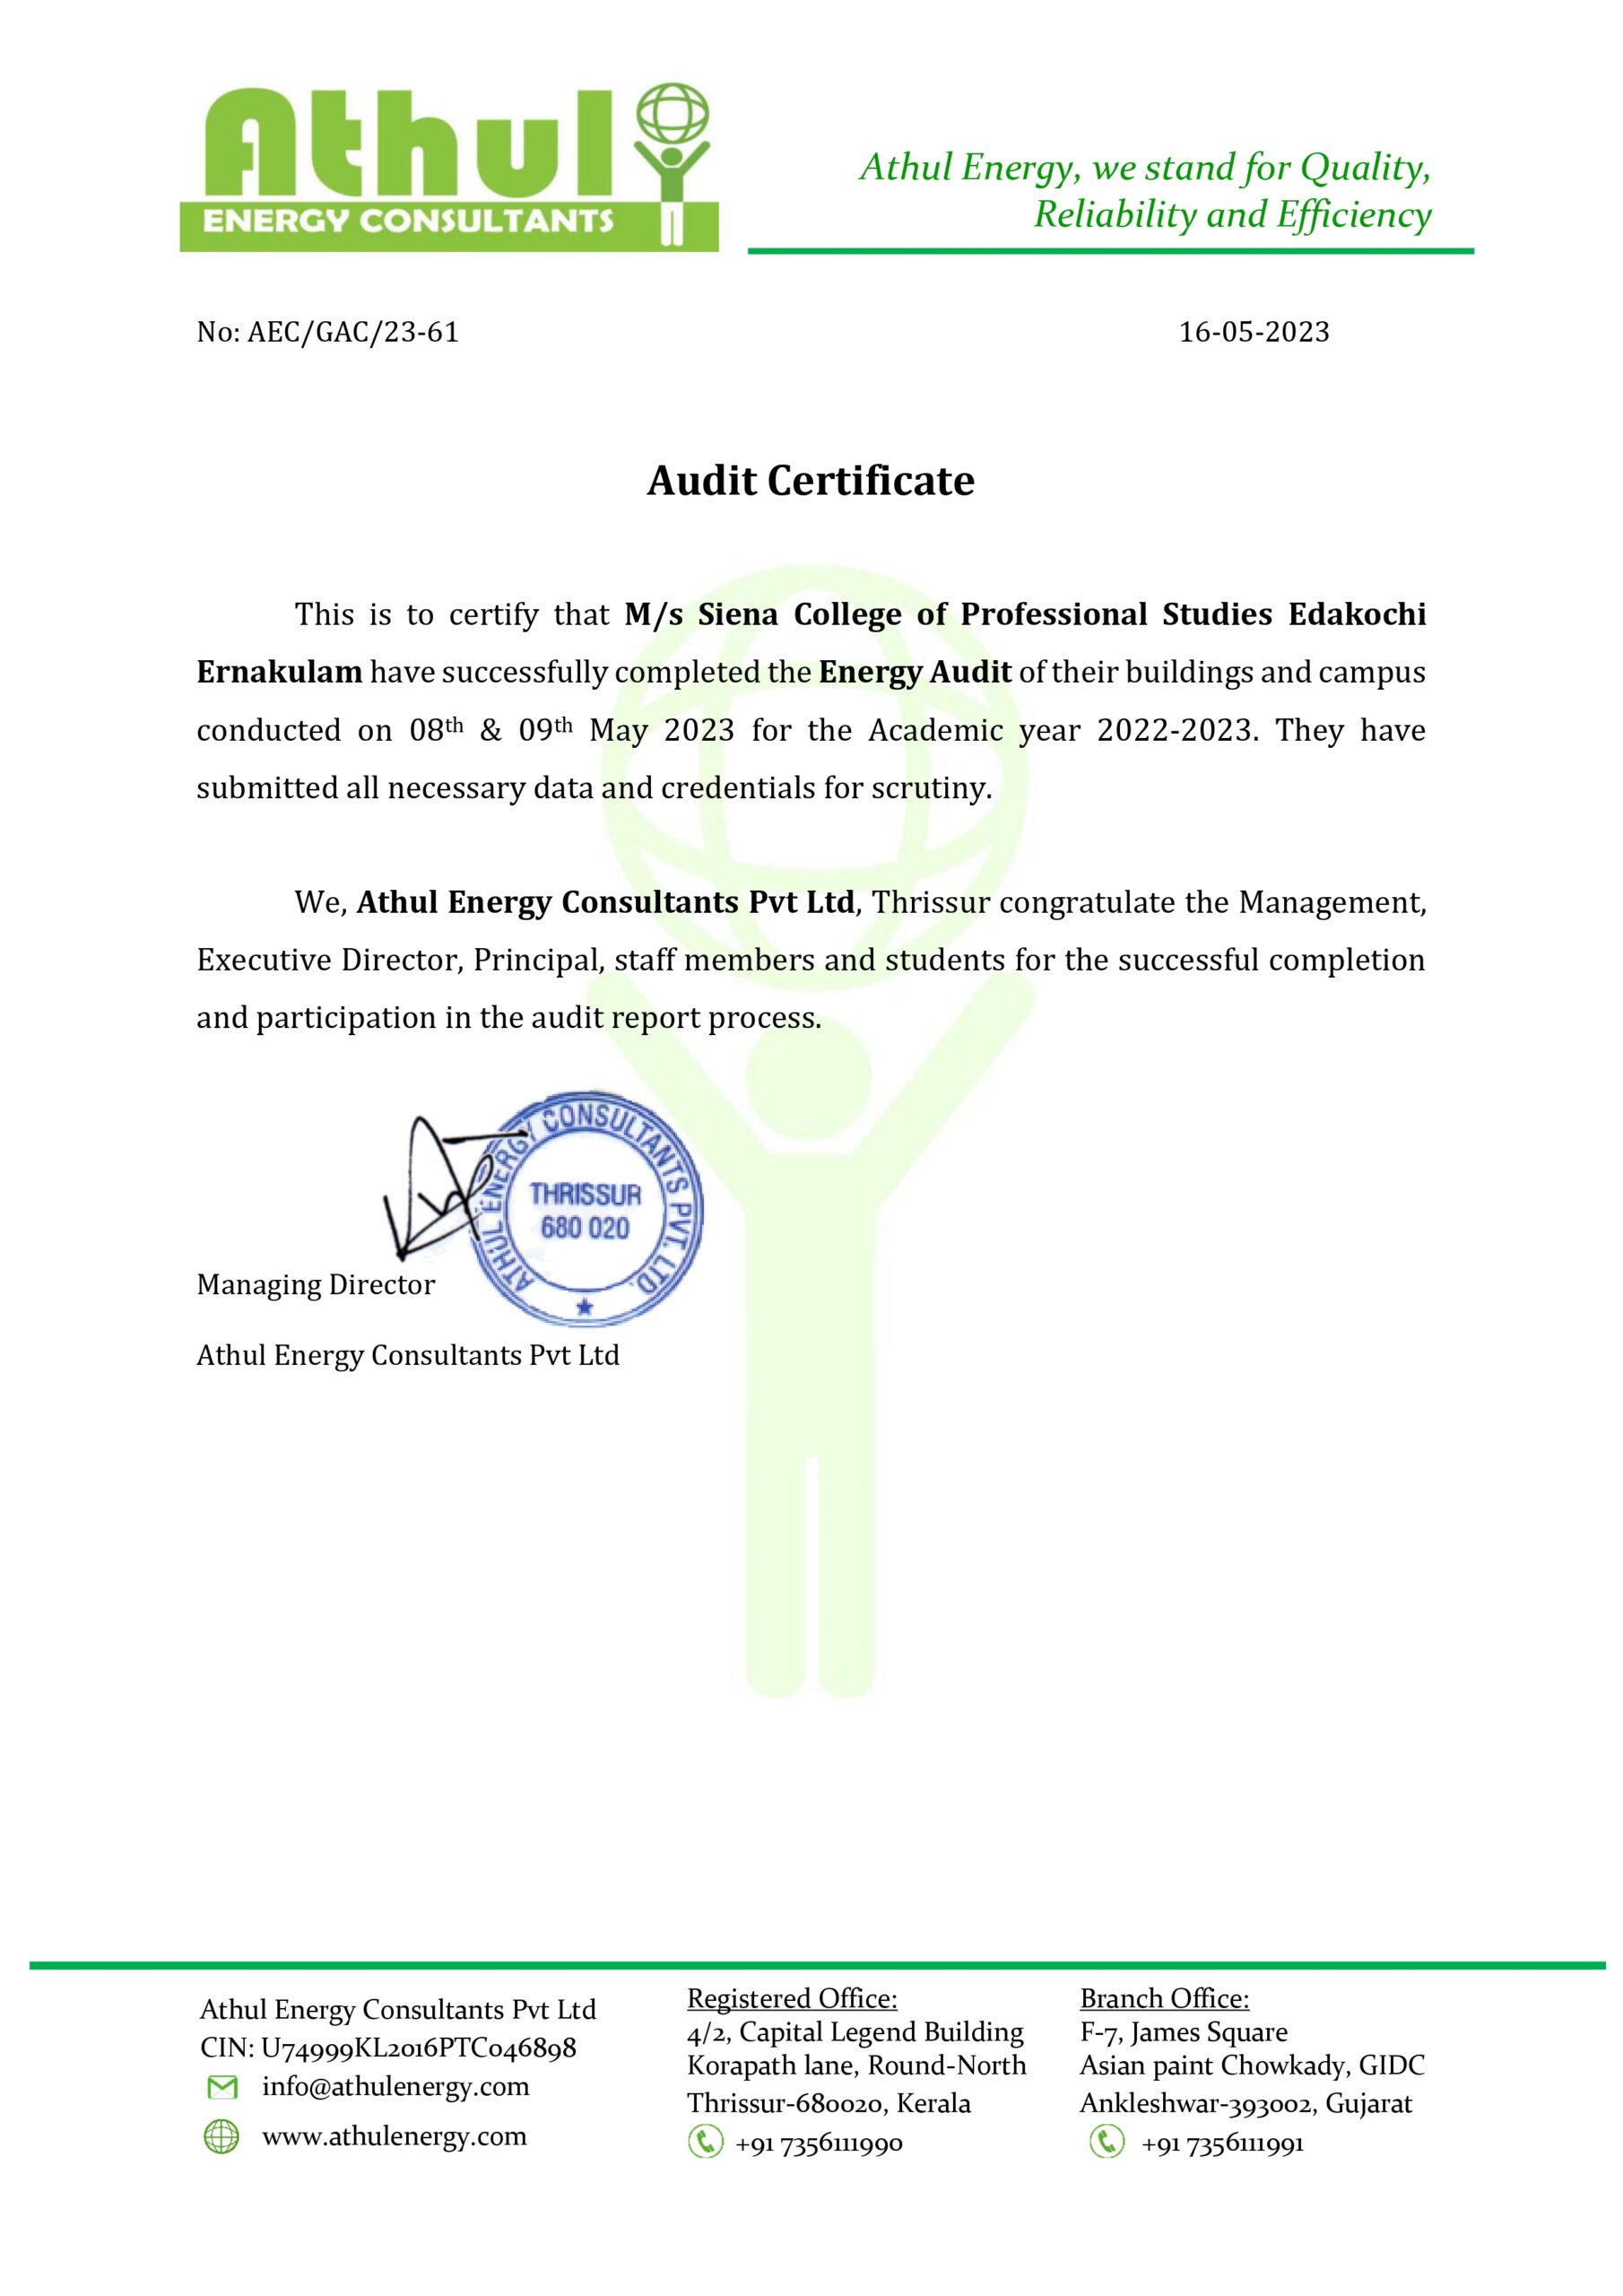 Siena college certificate-Energy-2023 (1)_page-0001